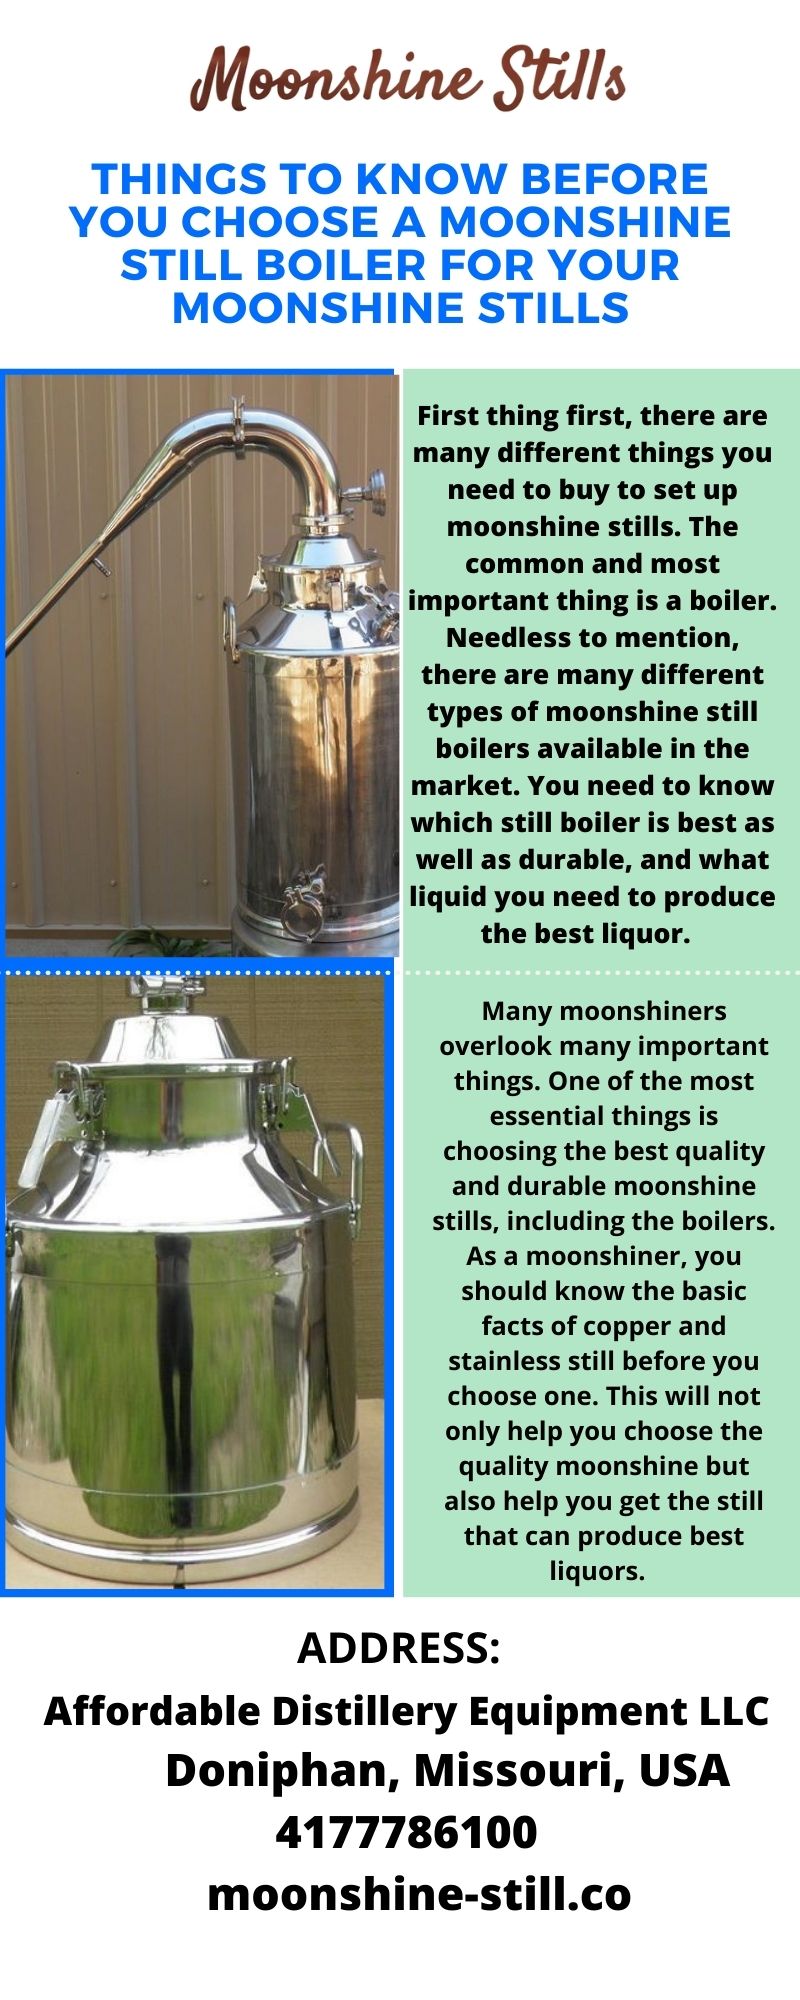 Things to Know Before You Choose a Moonshine Still Boiler for Your Moonshine Stills.jpg Please visit: http://linkgeanie.com/business/things-to-know-before-you-choose-a-moonshine-still-boiler-for-your-moonshine-stills
 by moonshinestill